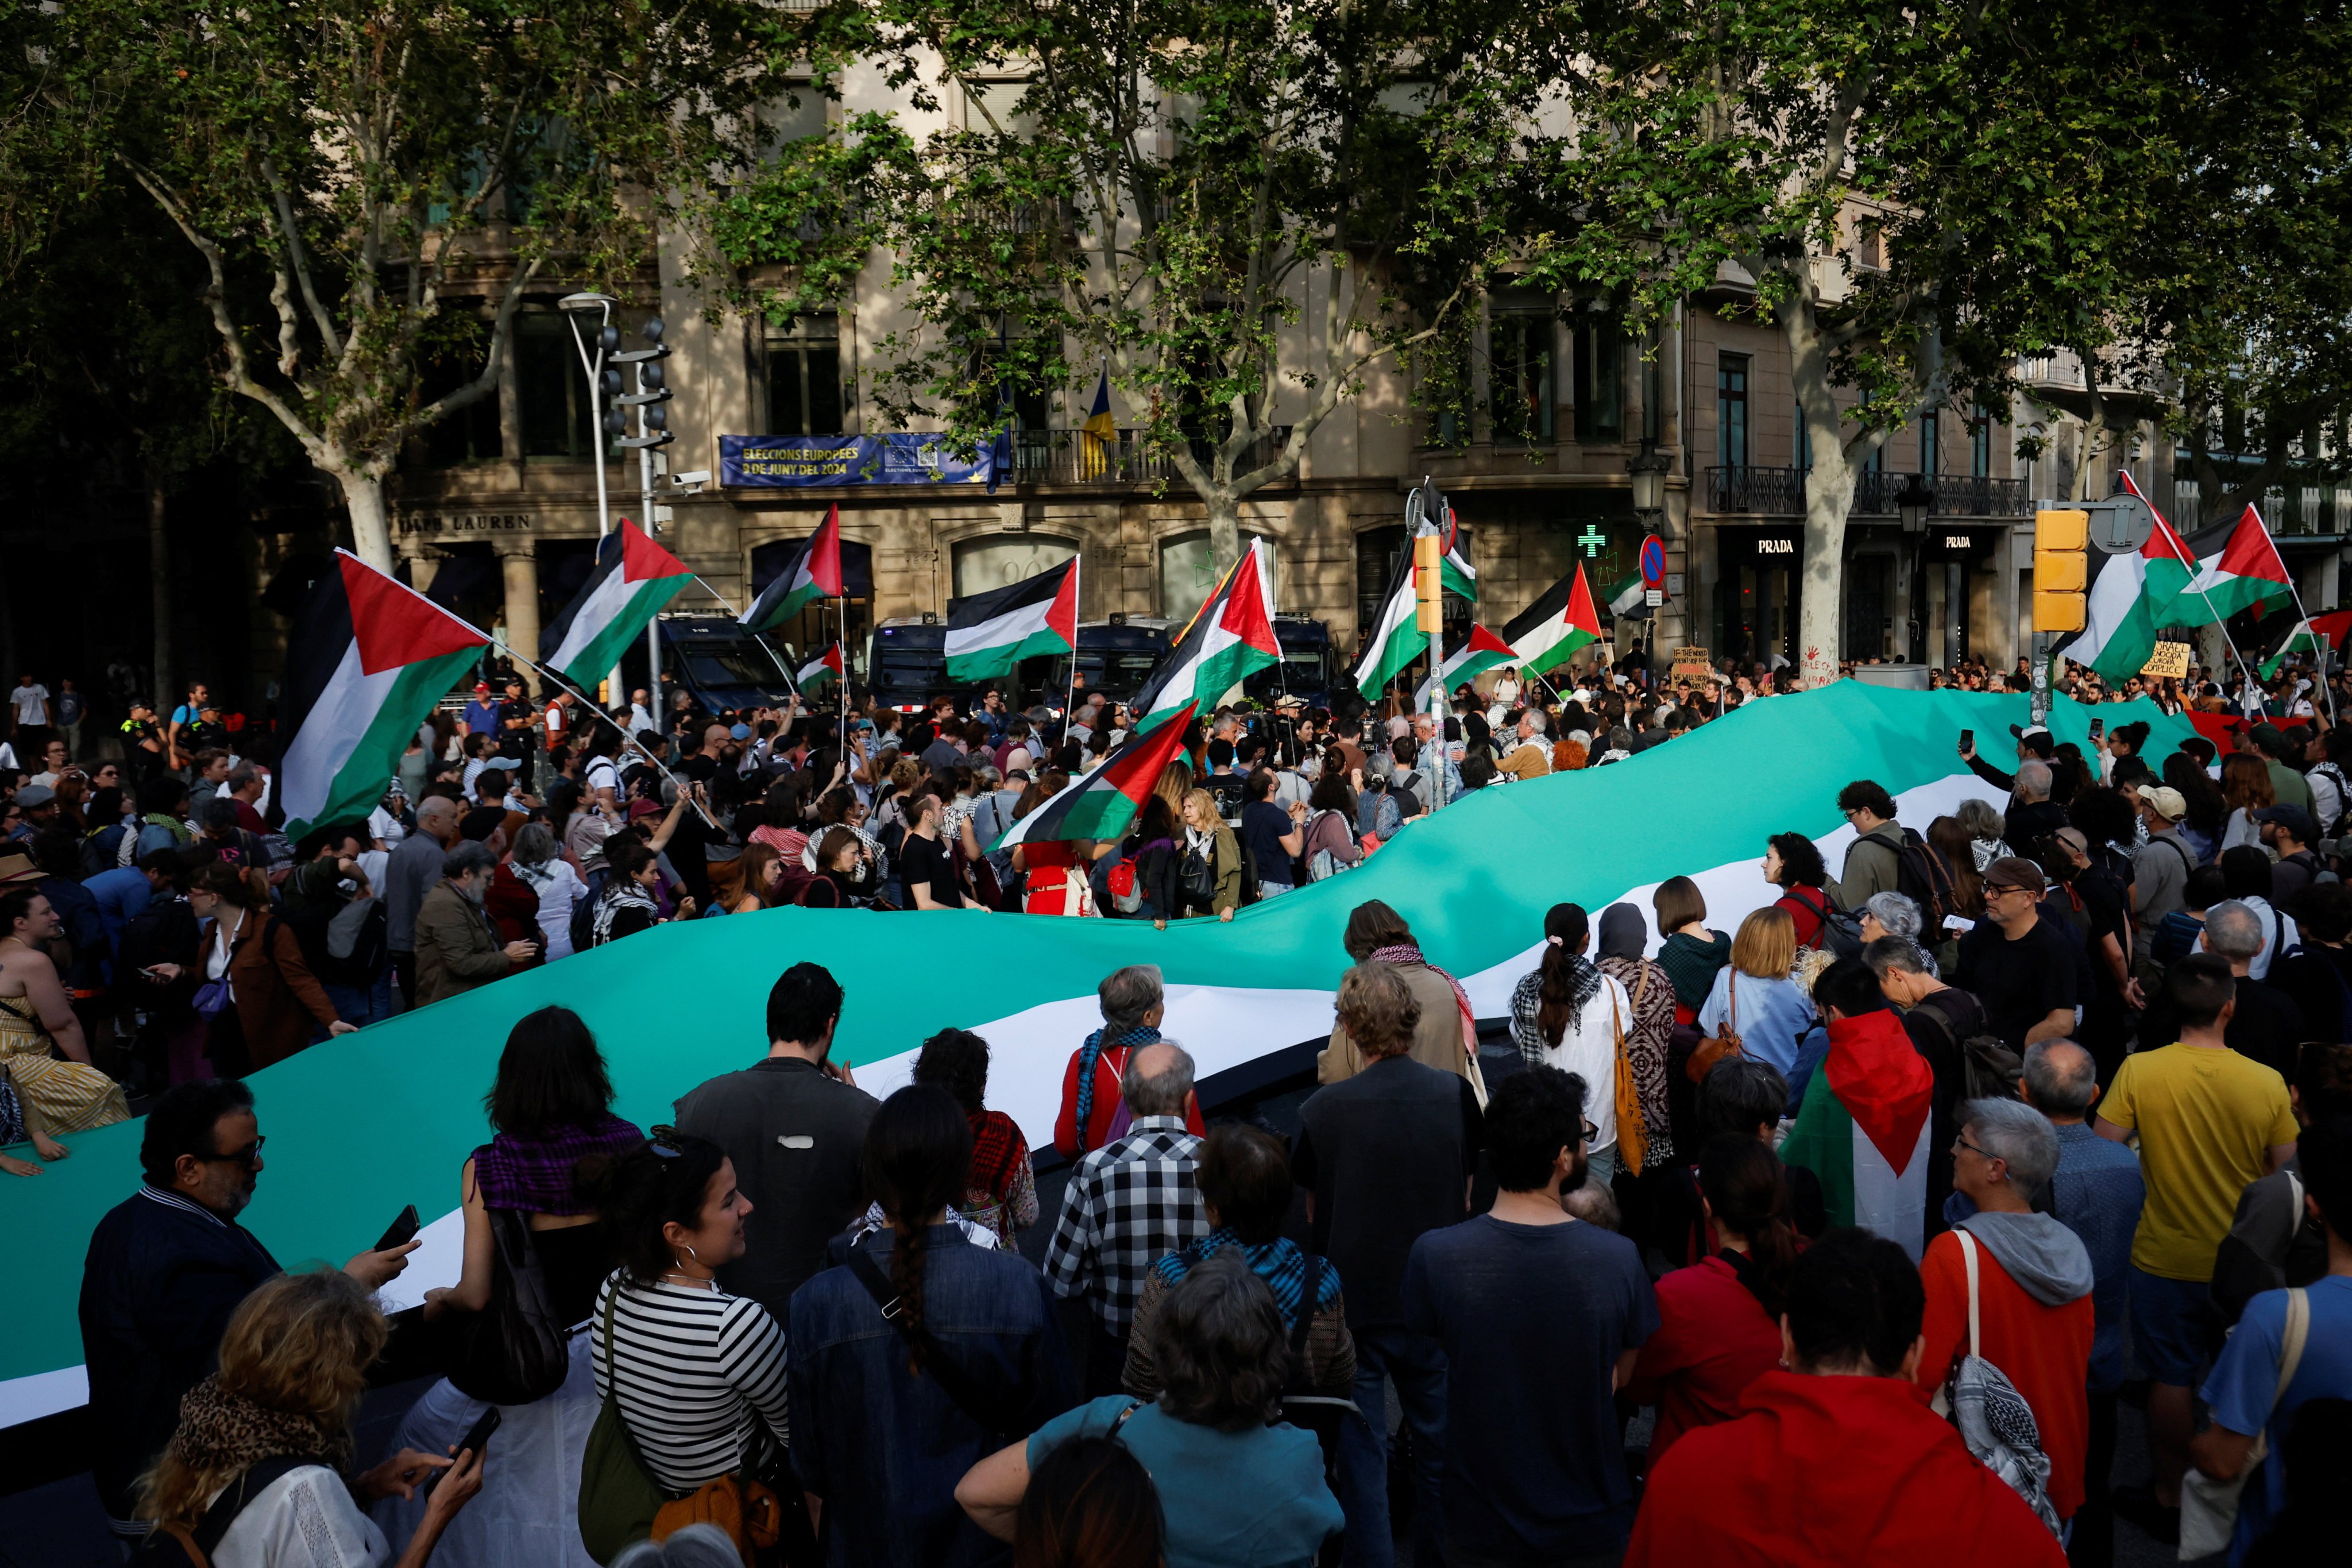 People gather near a giant flag during a pro-Palestinian protest outside an EU office at Passeig de Gracia in Barcelona, Spain on Monday. Photo: Reuters